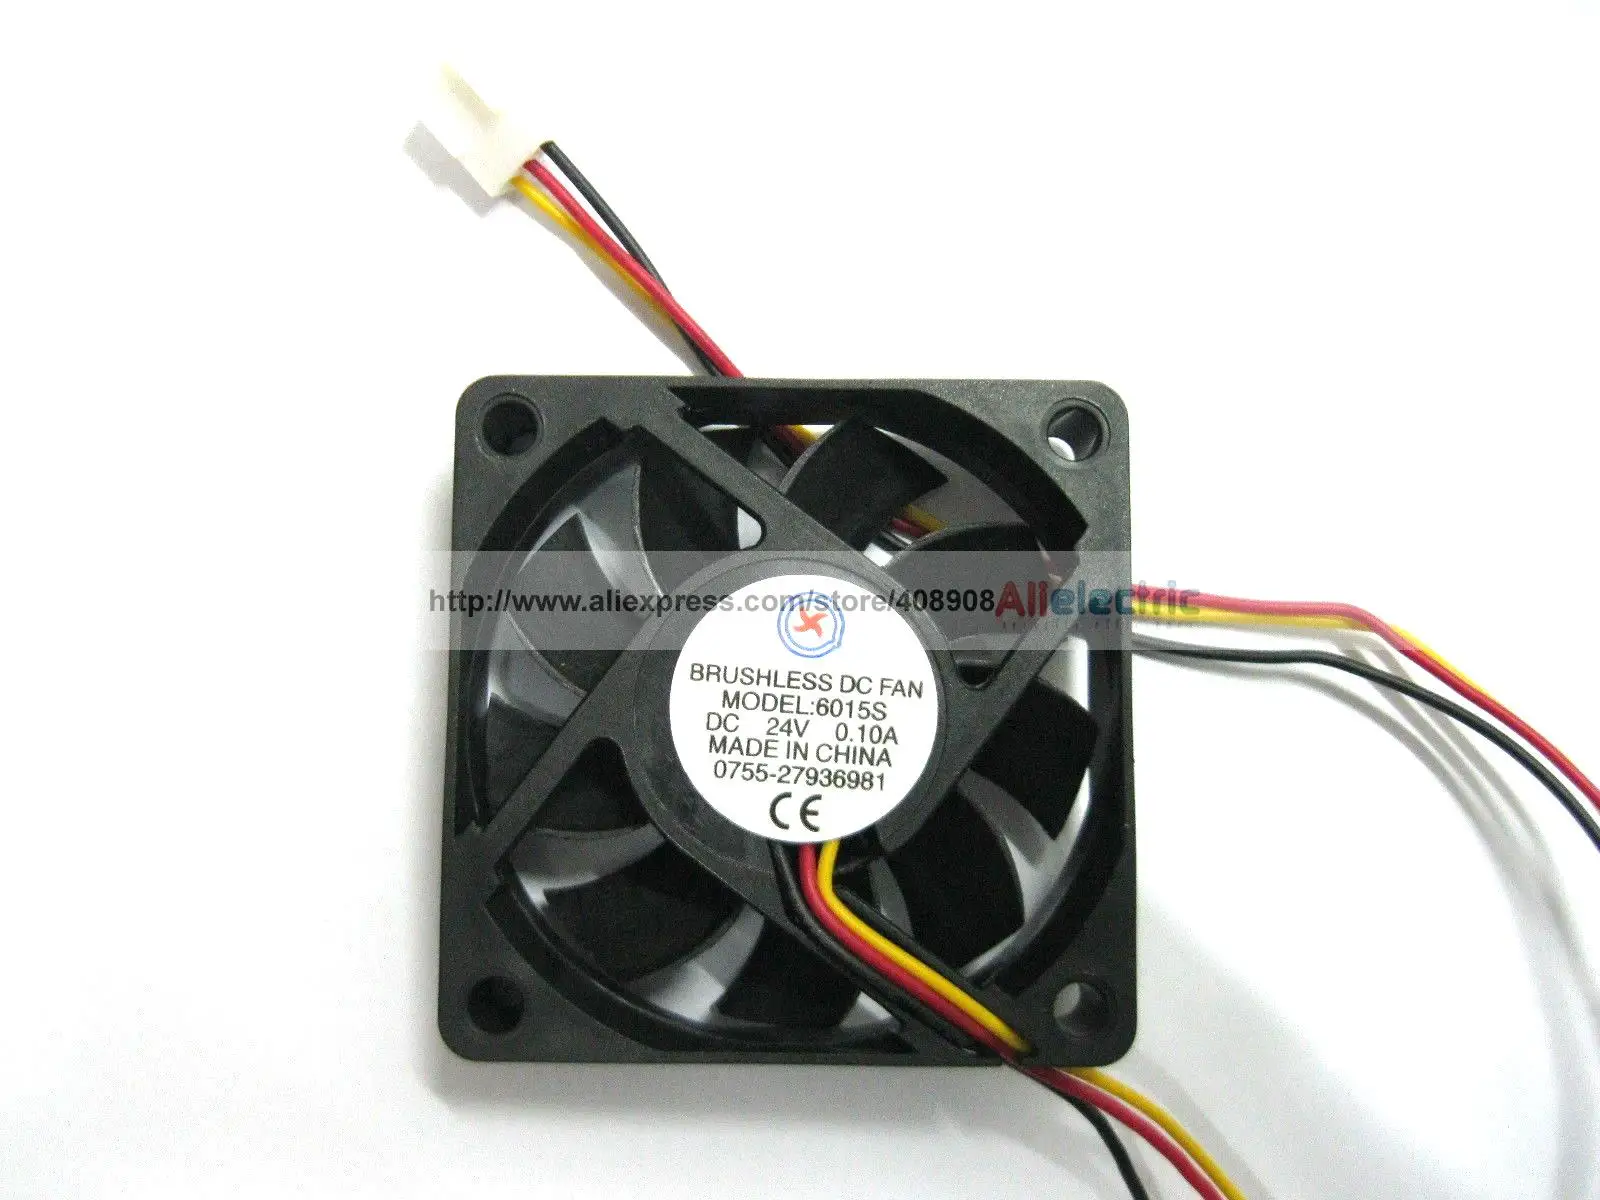 ФОТО 10 Pcs Brushless DC Cooling 9 Blade Fan 6015 24V 3 Wires 